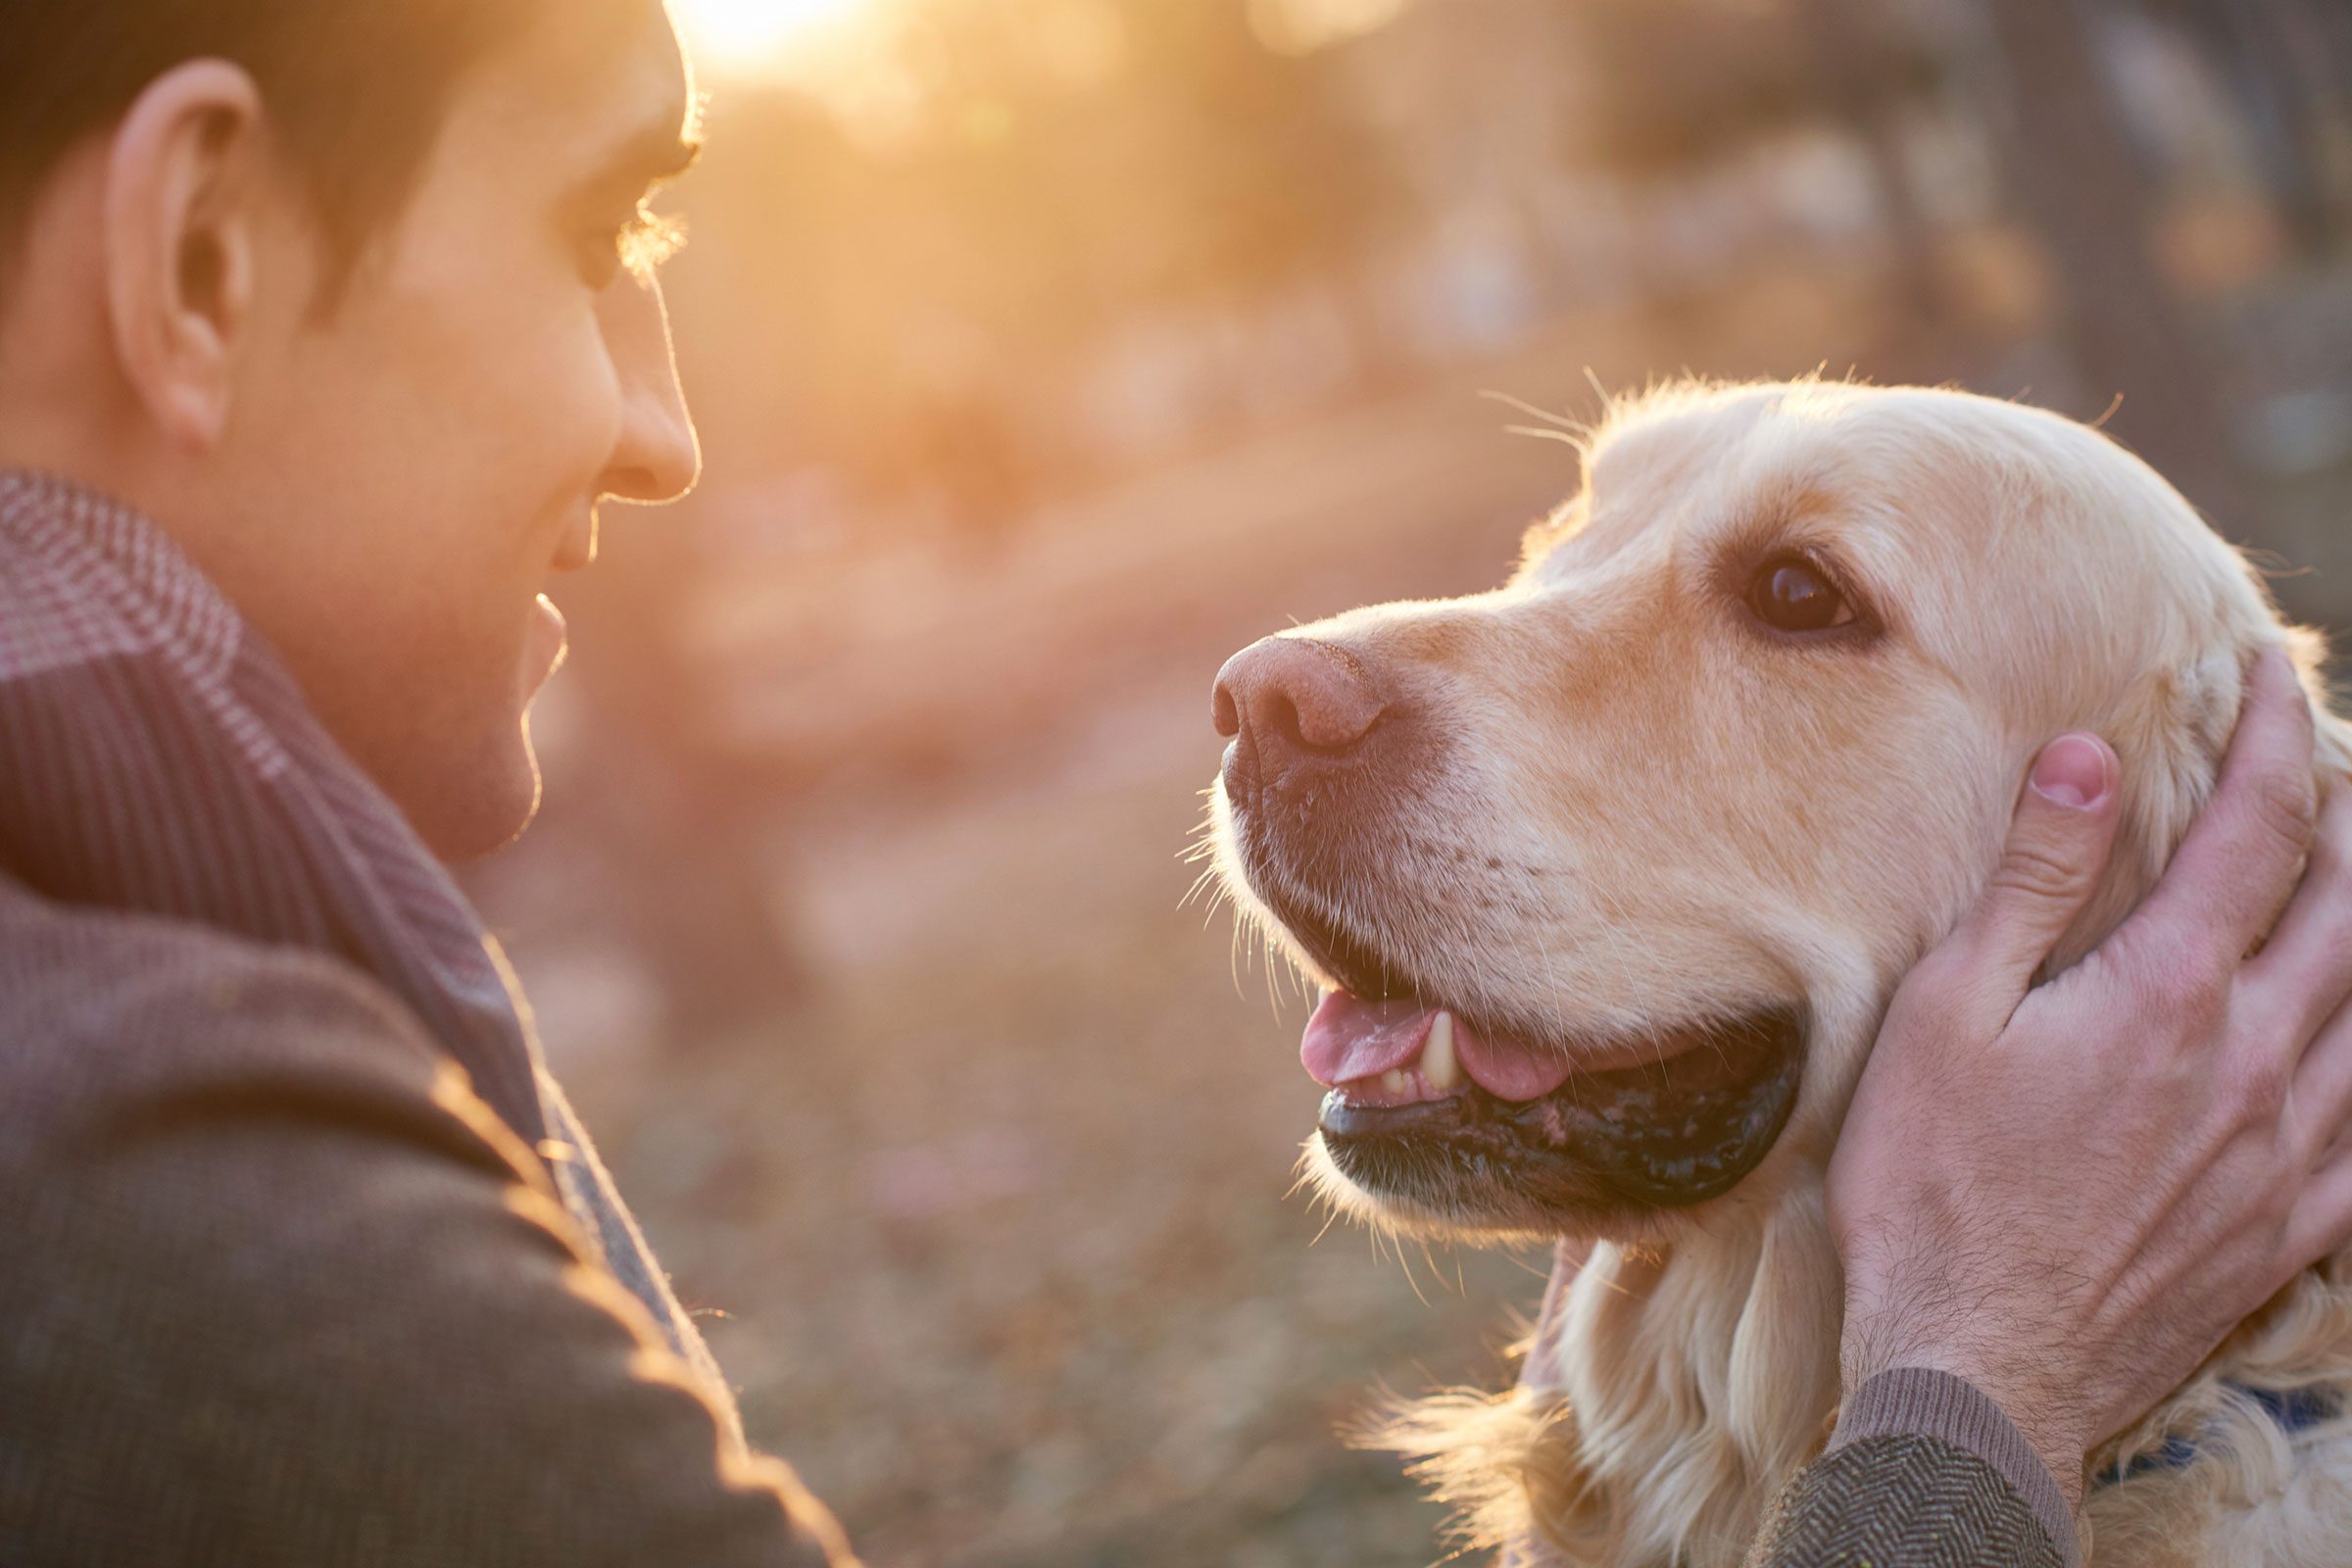 <p class="listicle-para">A small Swedish study found that female volunteers had lower levels of the stress hormone cortisol 15 to 30 minutes after petting a pooch. Having your own dog could give you even more benefits. Participants who owned dogs had increased levels of the happy hormone oxytocin between one and five minutes later, and their heart rates were lower up to an hour later—but those without canines of their own didn’t get those same benefits. Find a fix to <a href="https://www.rd.com/list/how-to-solve-the-most-common-pet-behavioral-problems/">these common pet behavior problems</a> to strengthen your bond.</p>